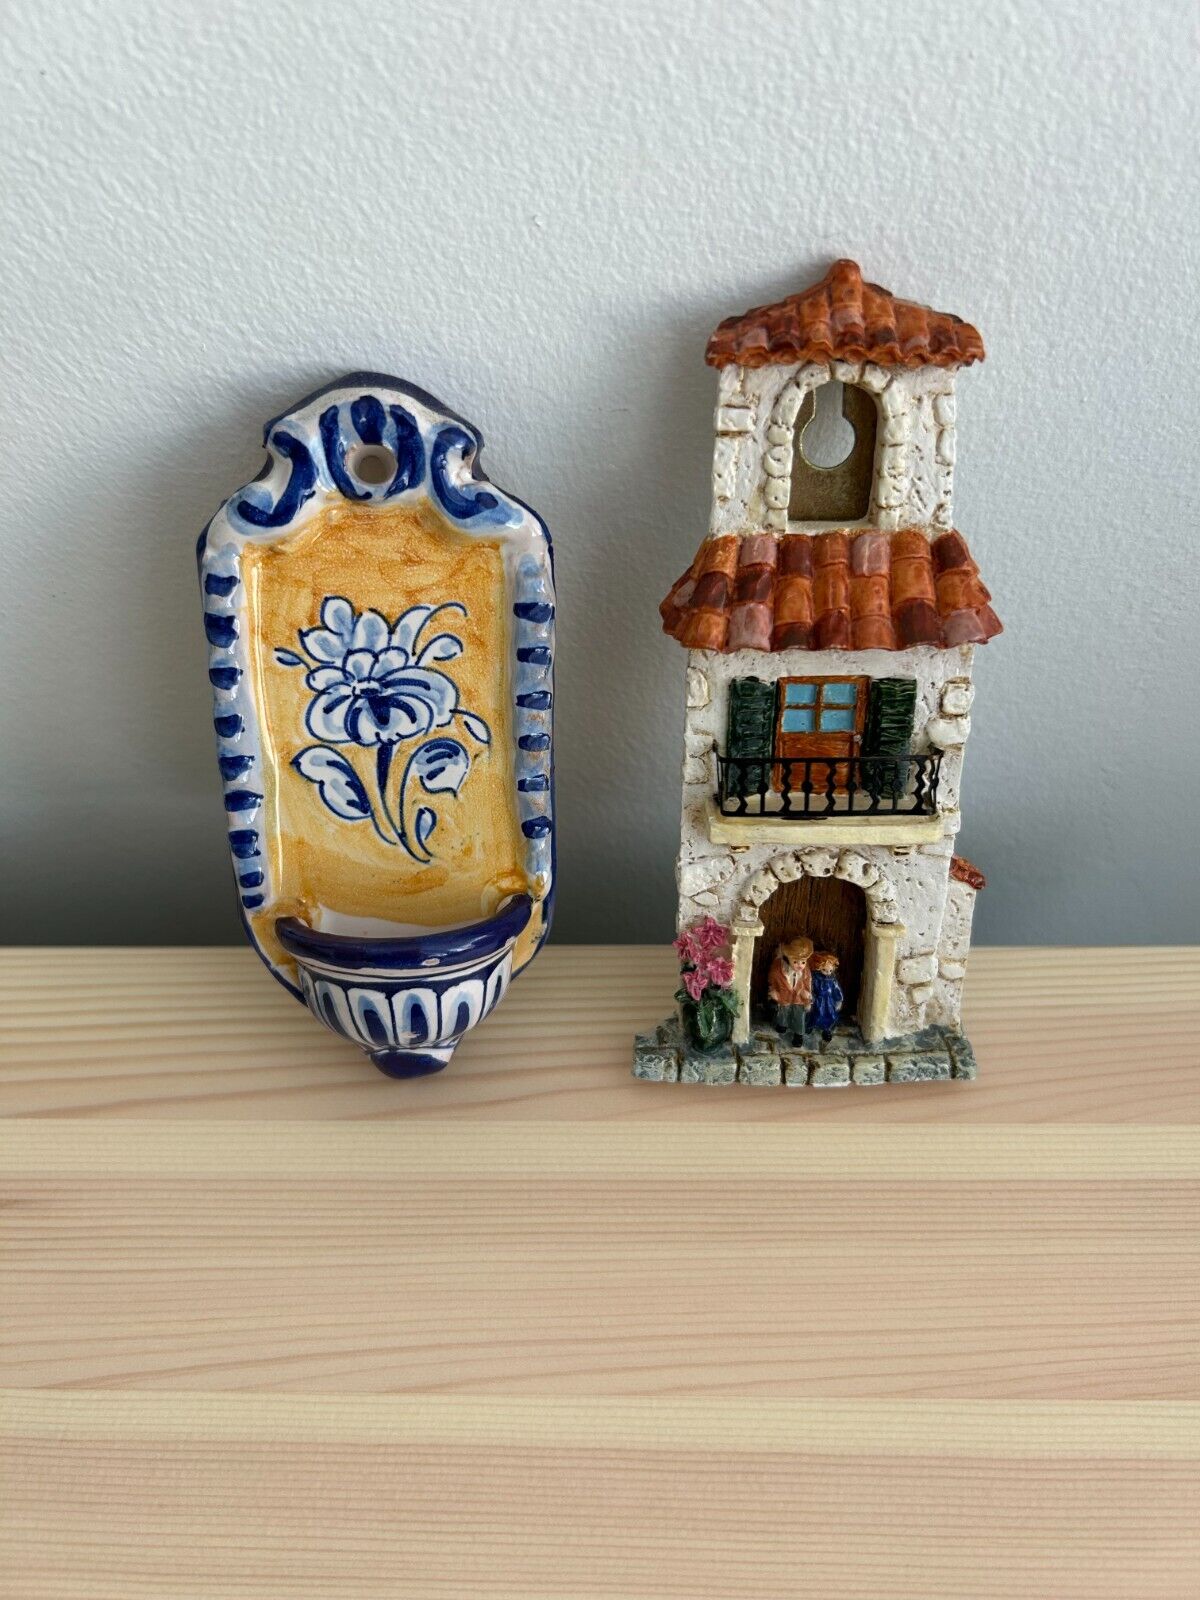 Lot of 2 Decorative Hanging Ceramic Tiles from France & Spain